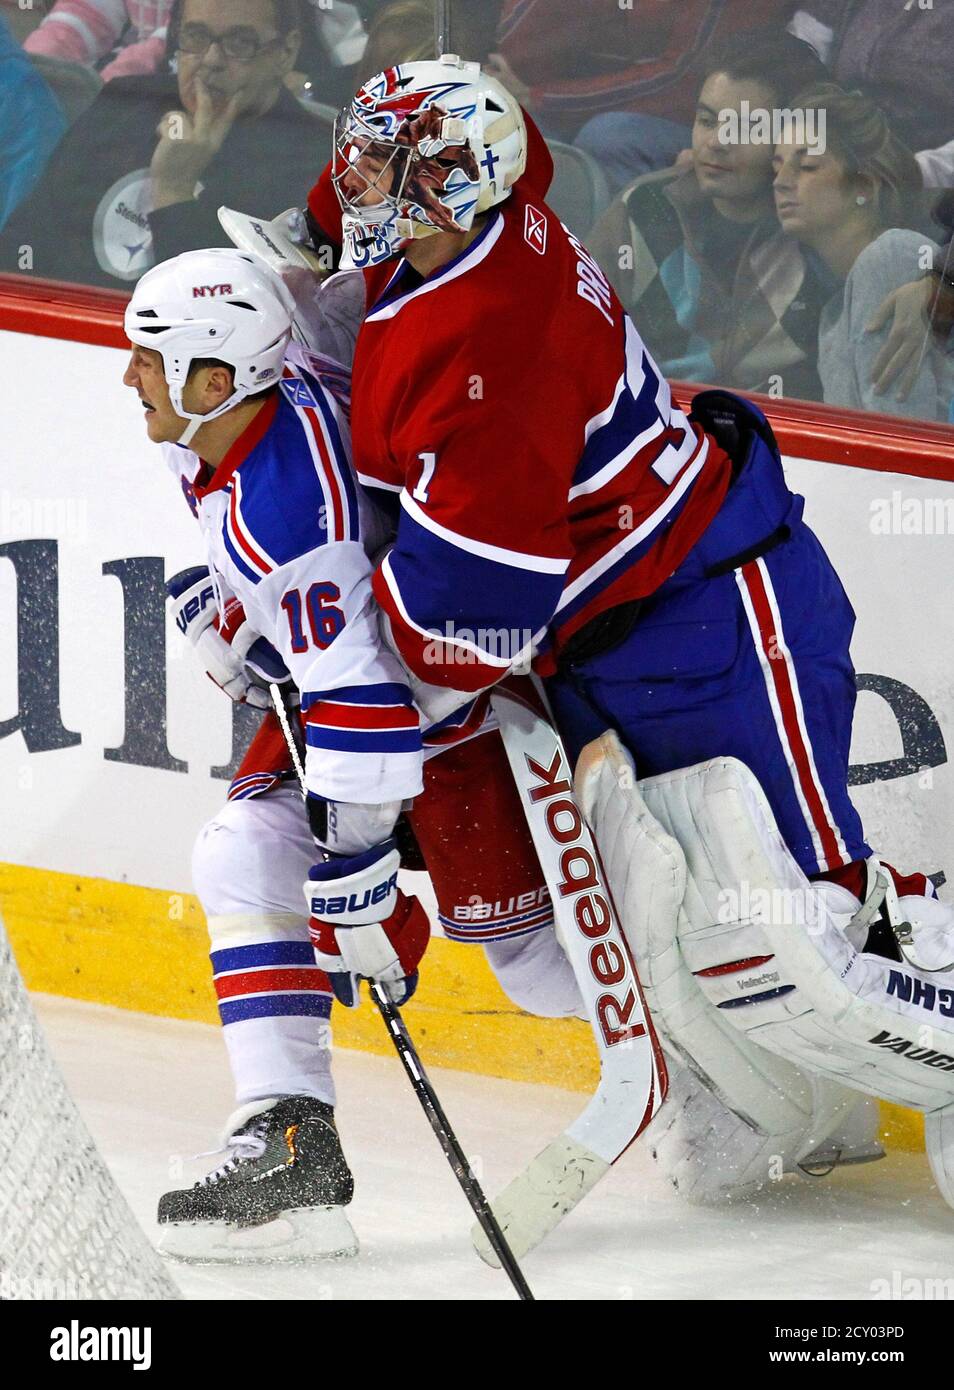 New York Rangers left wing Sean Avery (L) collides with Montreal Canadiens goalie Carey Price during the third period of their NHL hockey game in Montreal, February 5, 2011.   REUTERS/Shaun Best  (CANADA - Tags: SPORT ICE HOCKEY) Stock Photo